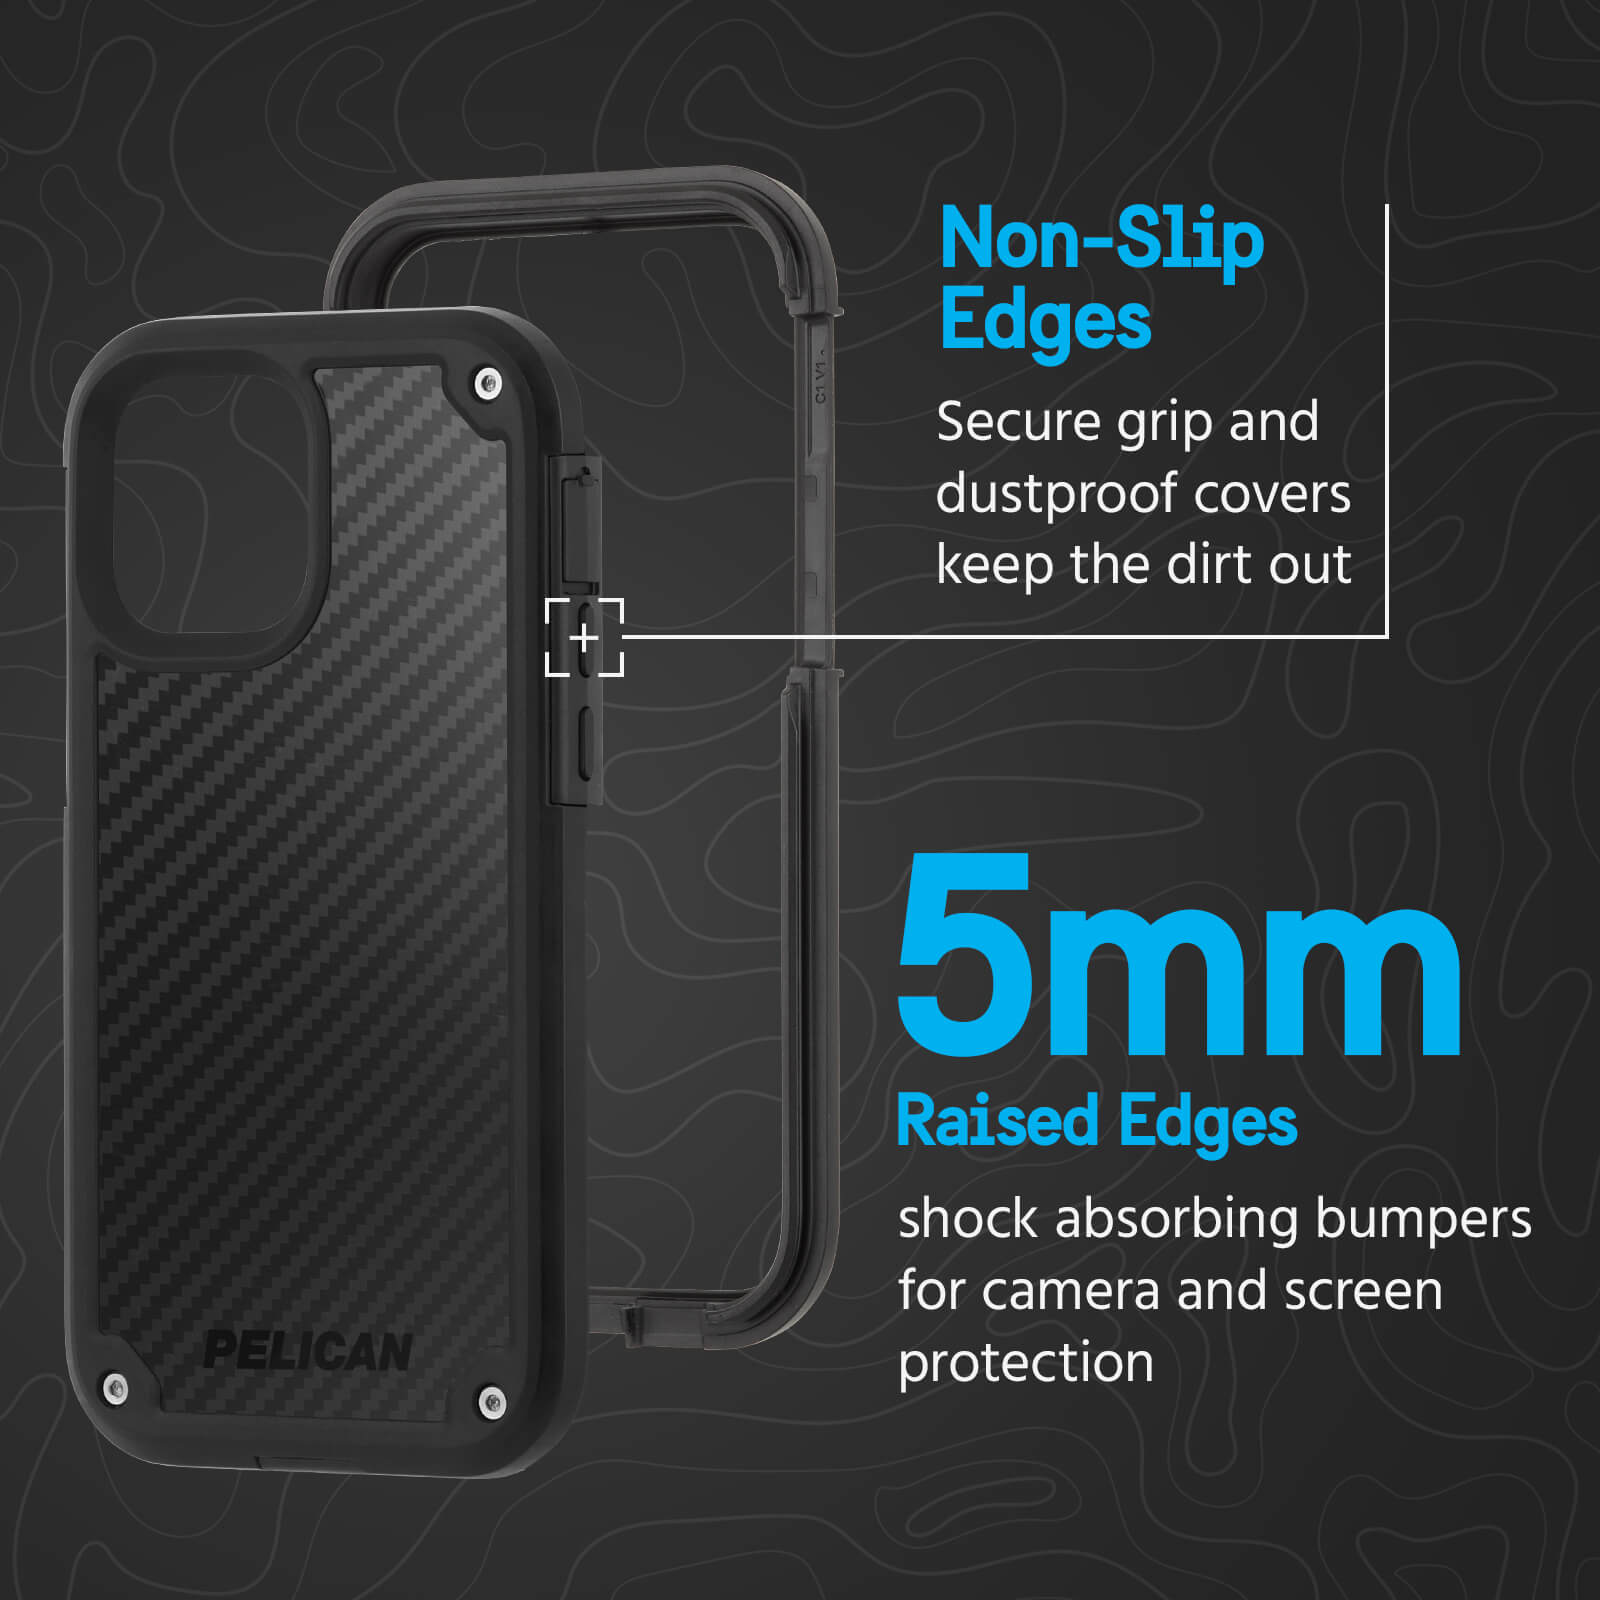 Non-slip edges. Secure grip and dustproof covers keep the dirt out. 5mm raised edges shock absorbing bumpers for camera and screen protection. color::Black